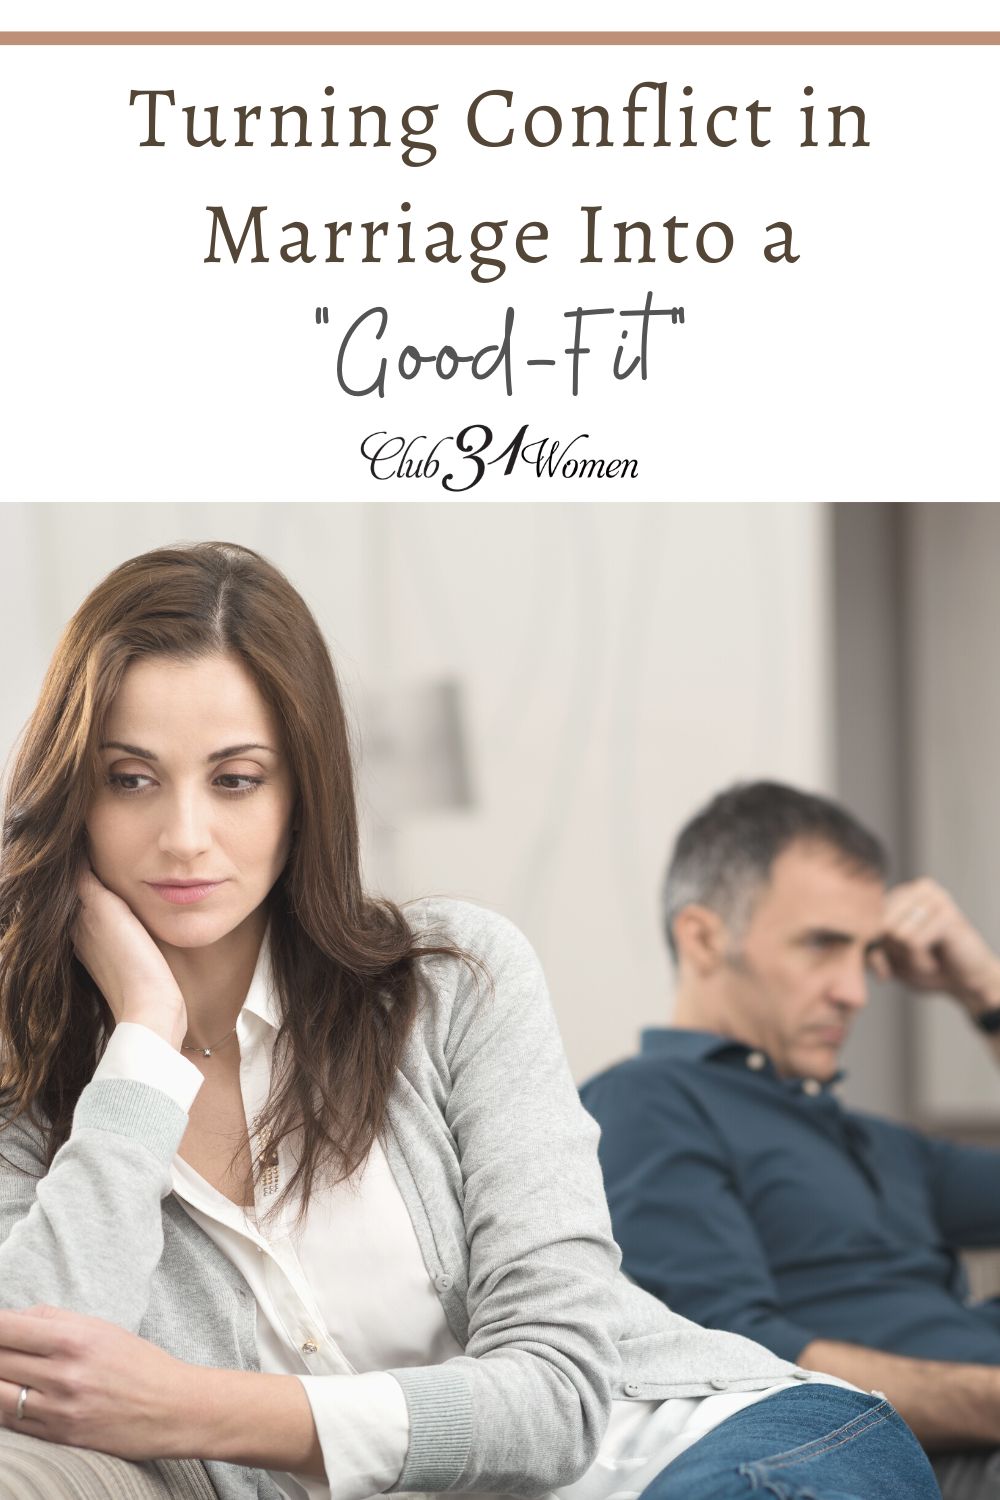 Conflict in marriage is normal. Our goal in marriage is not to become conflict-free but to learn how to manage conflict in a healthy way. via @Club31Women